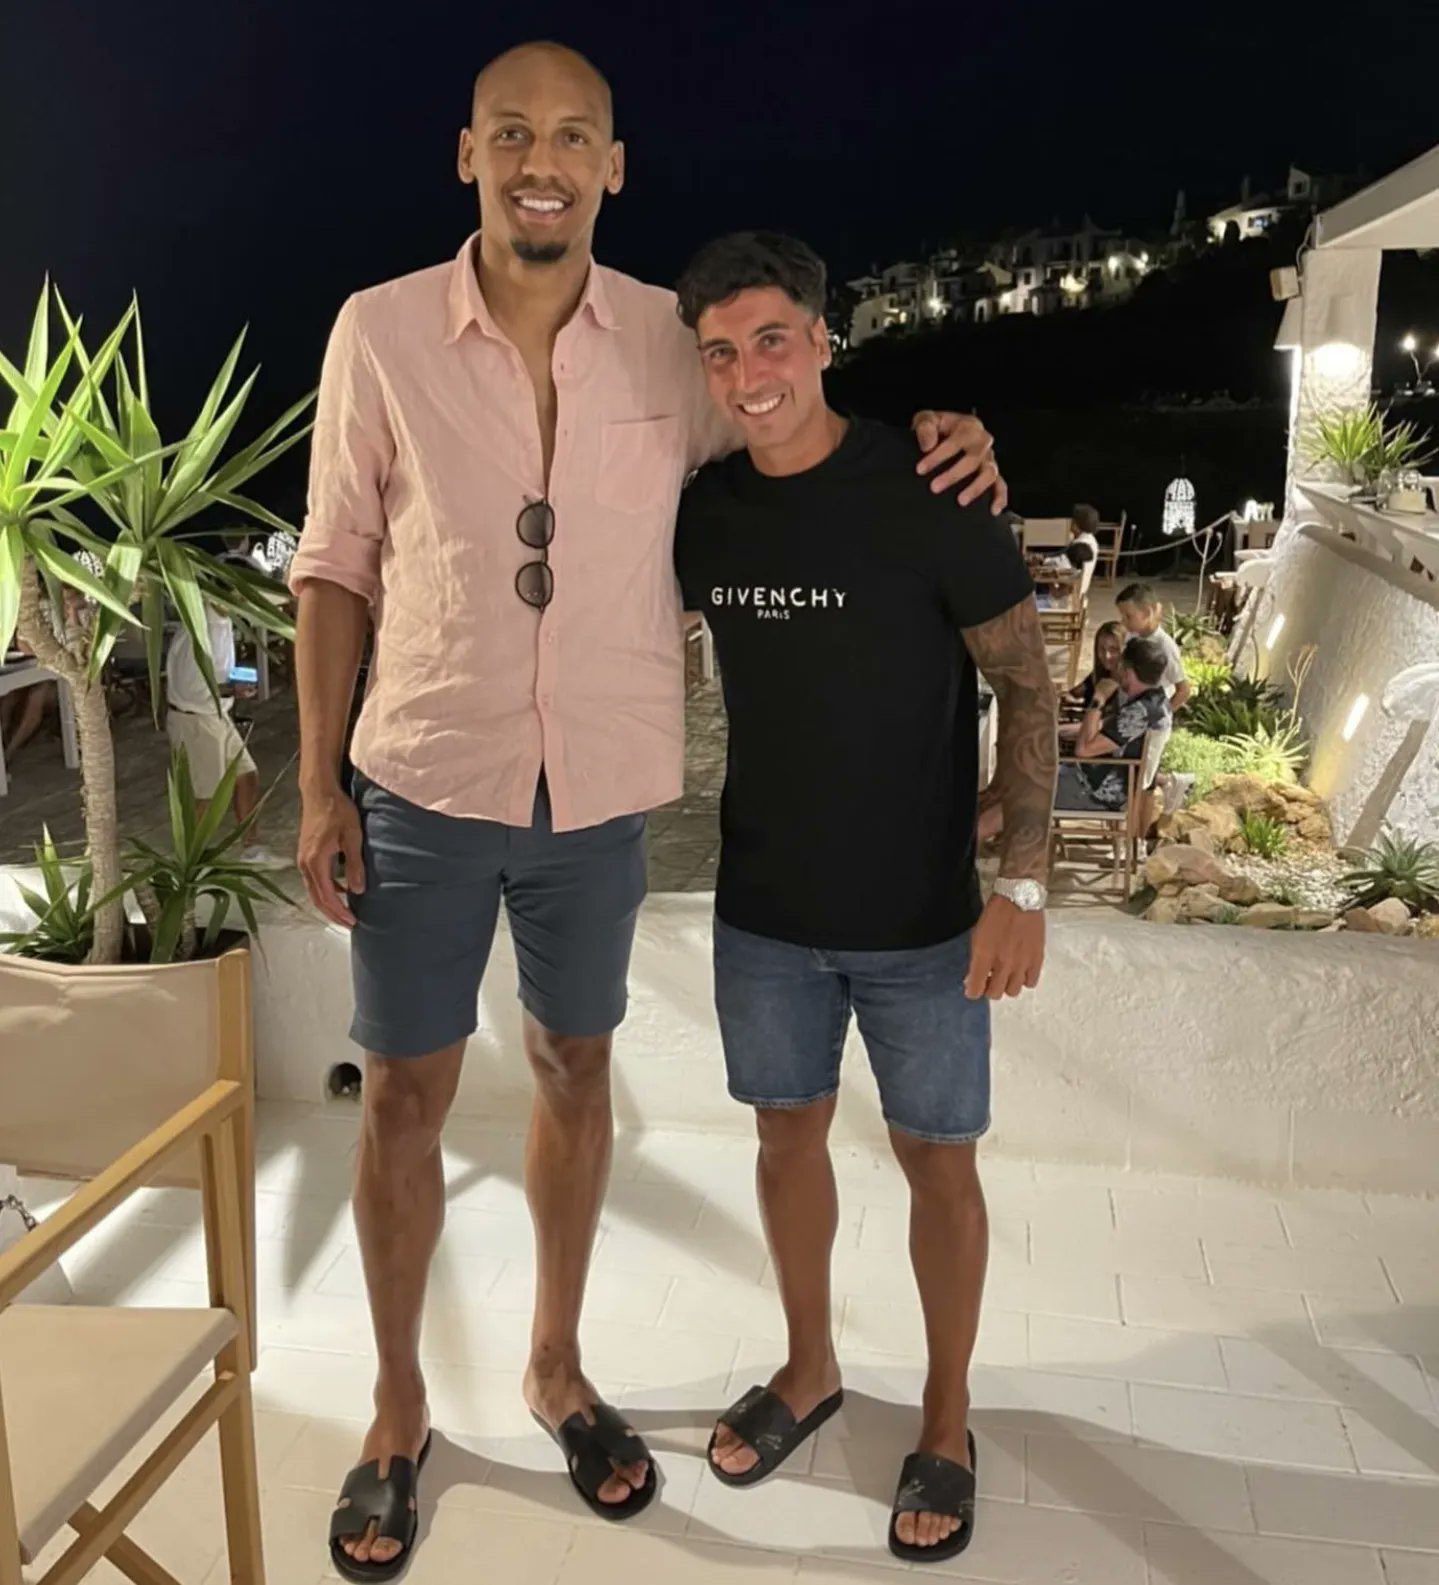 SPORF on X: "This Liverpool fan met Fabinho on holiday and had a kick-about with him. That same evening, Fabinho invite him and his girlfriend to share a meal with him